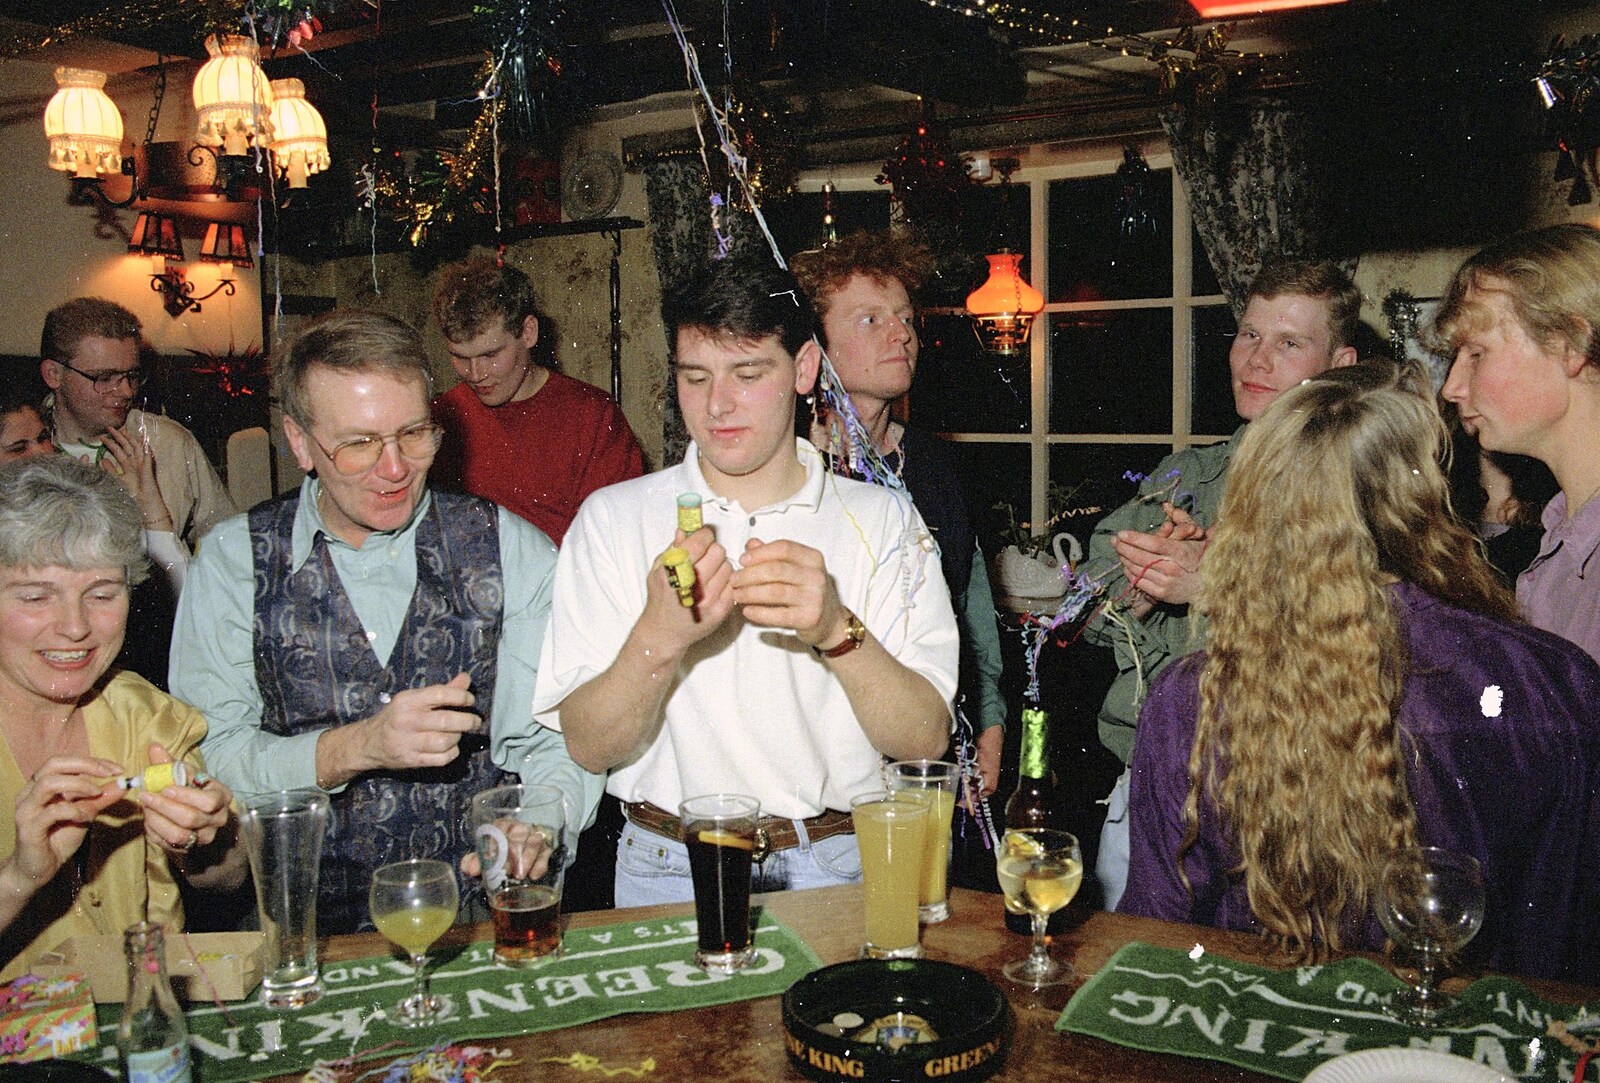 Ricey pulls a popper from New Year's Eve at the Swan Inn, Brome, Suffolk - 31st December 1994